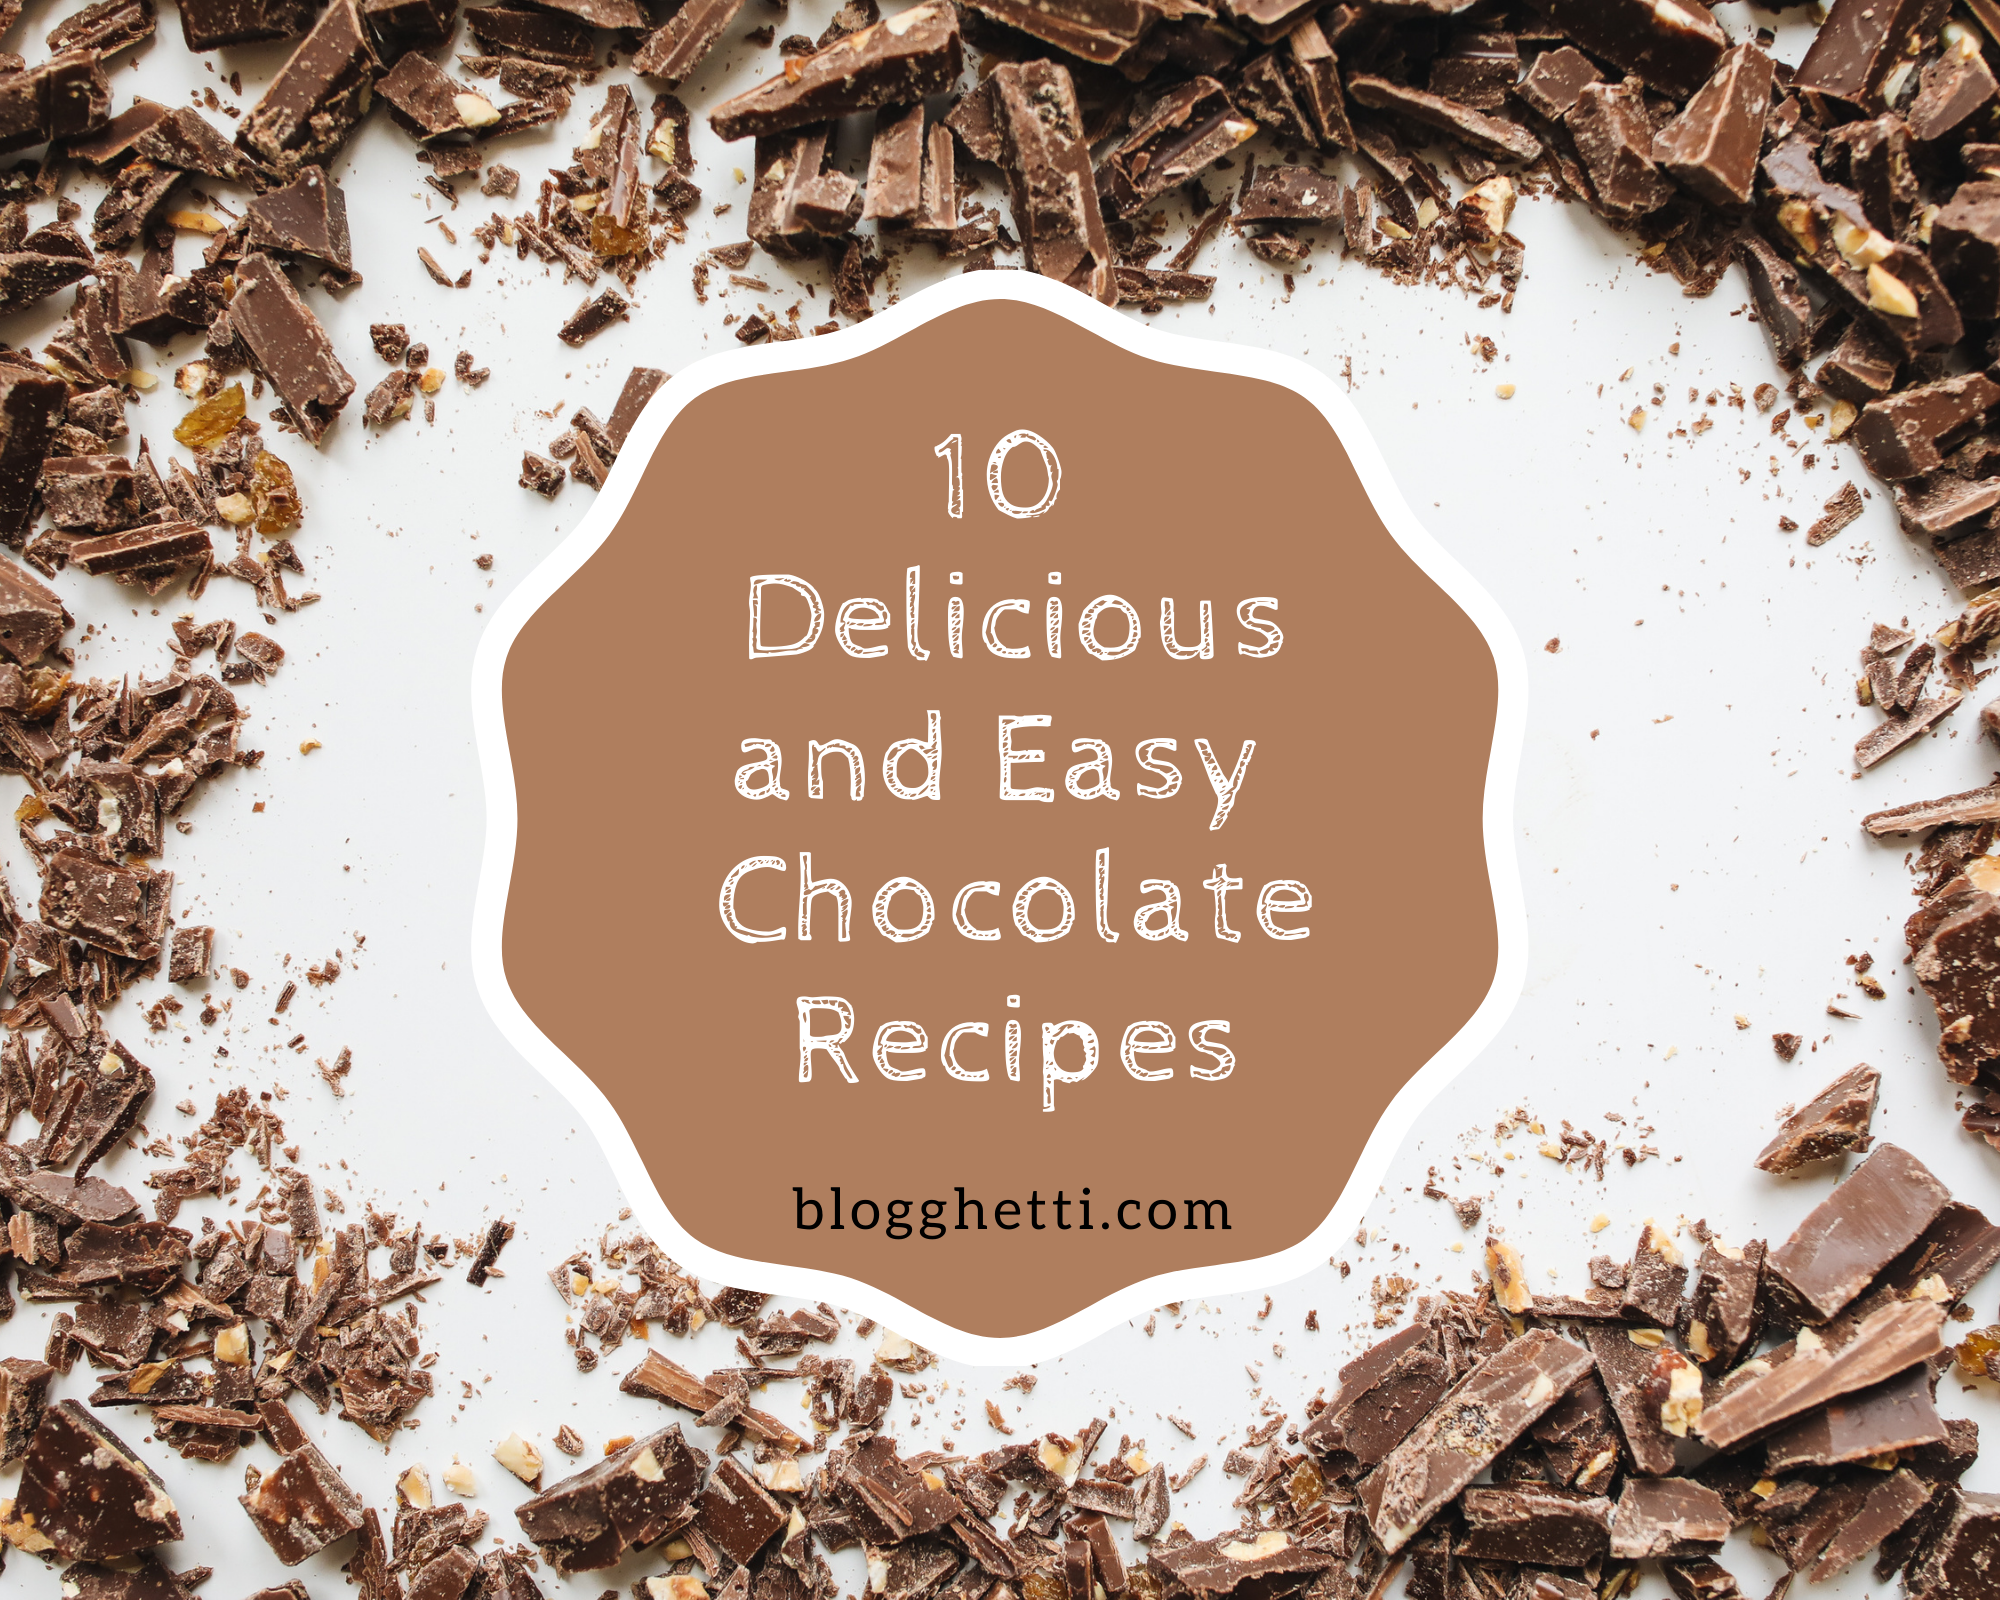 10 delicious and easy chocolate recipes with text overlay